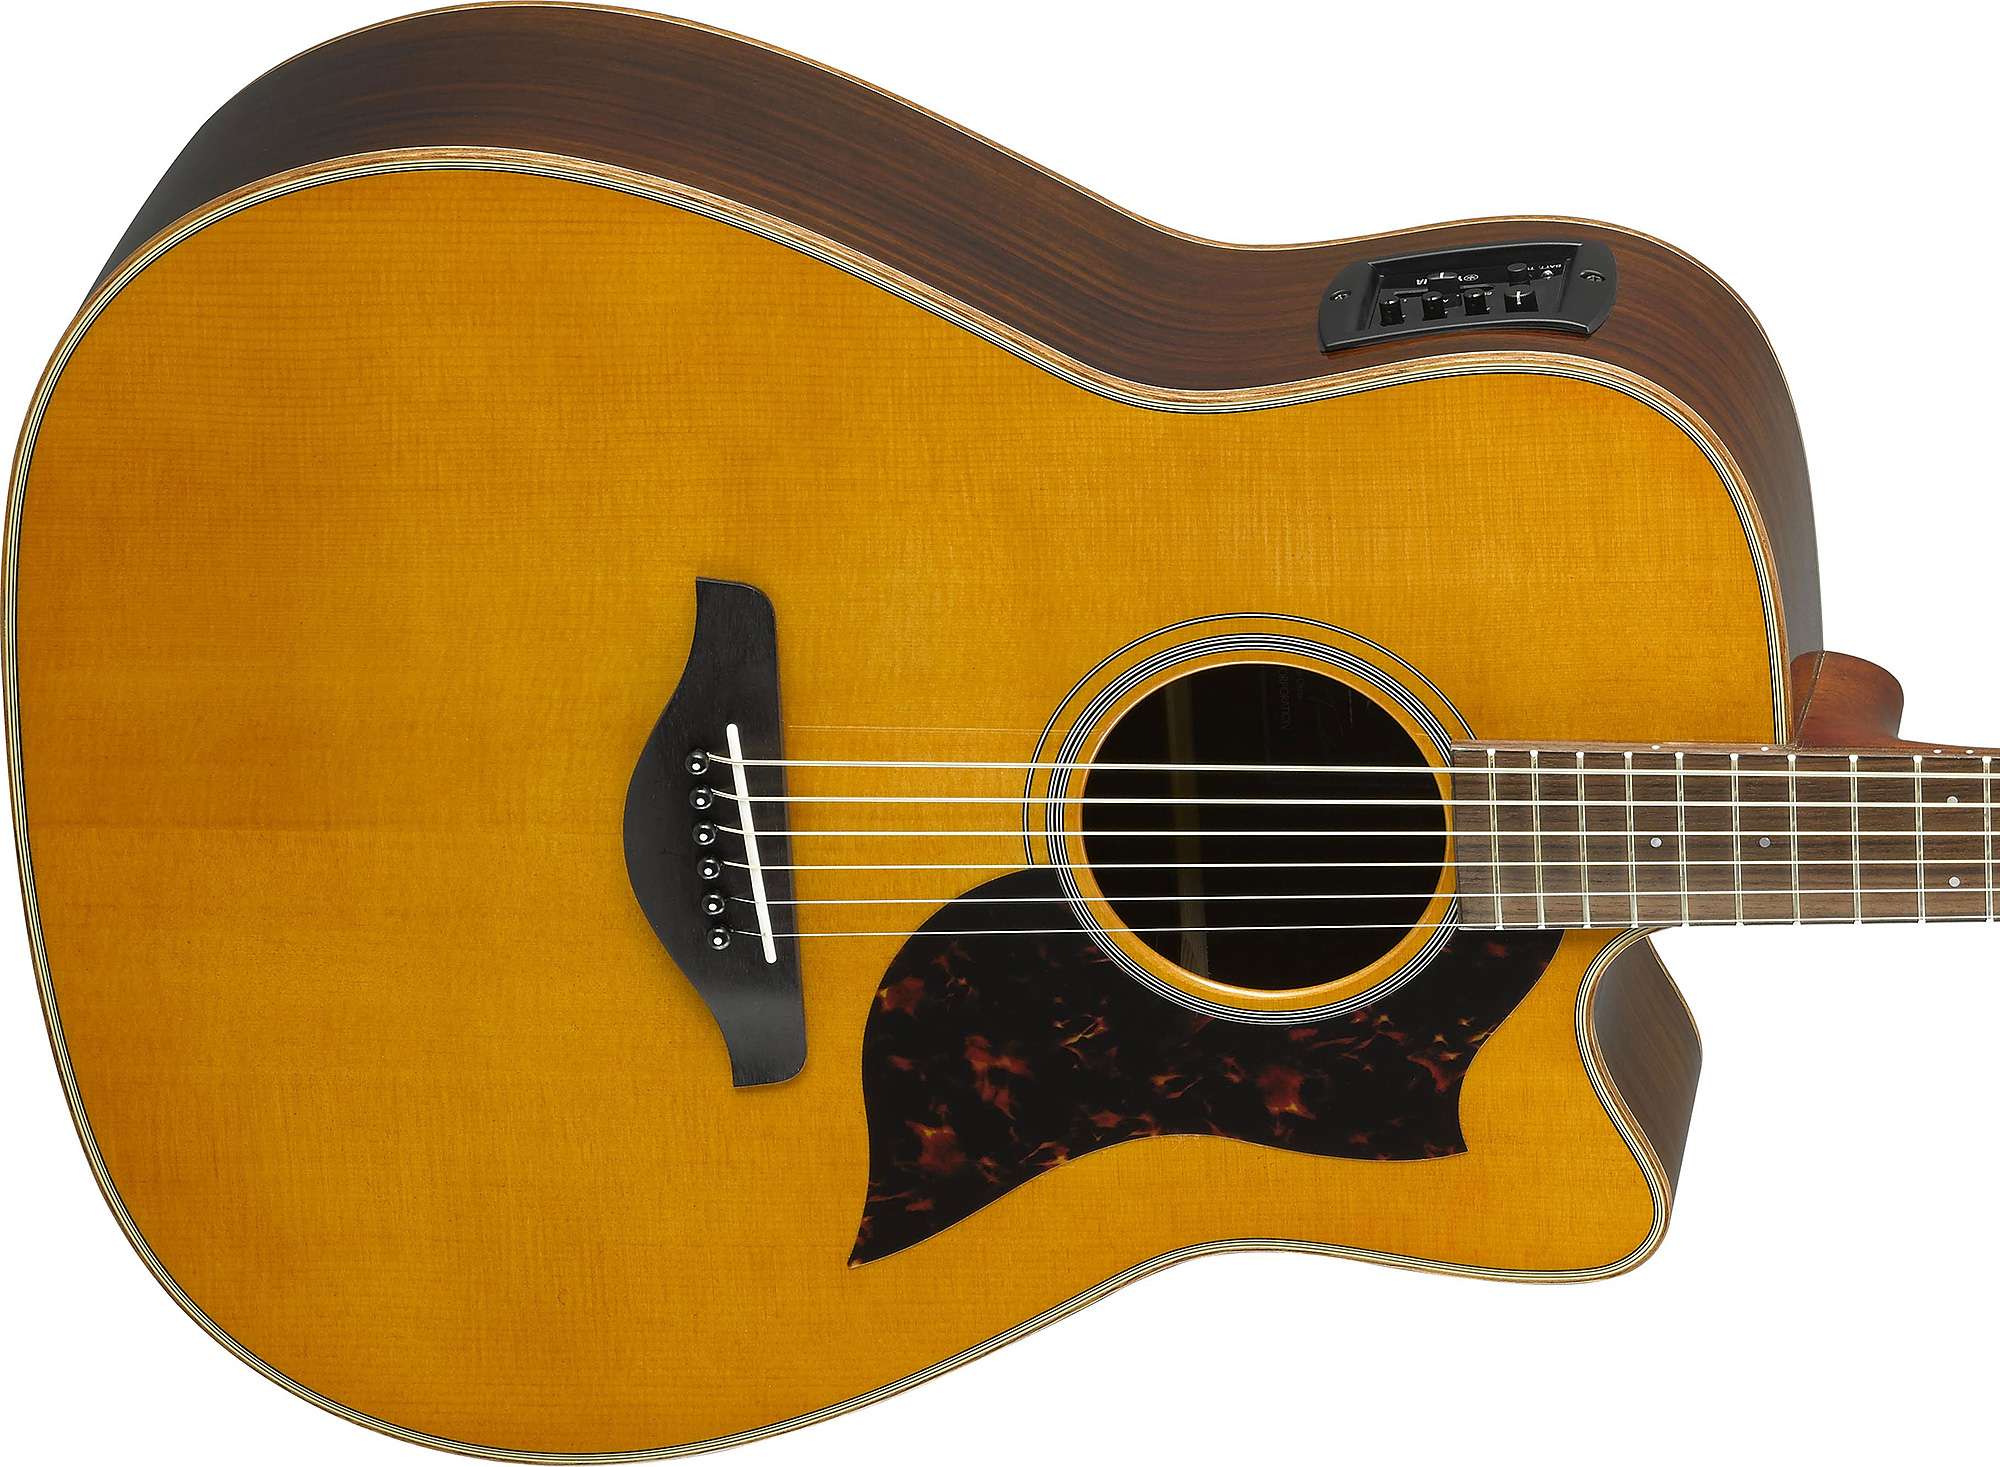 Yamaha A1r Ii Vn Dreadnought Cw Epicea Palissandre 2017 - Vintage Natural - Electro acoustic guitar - Variation 3